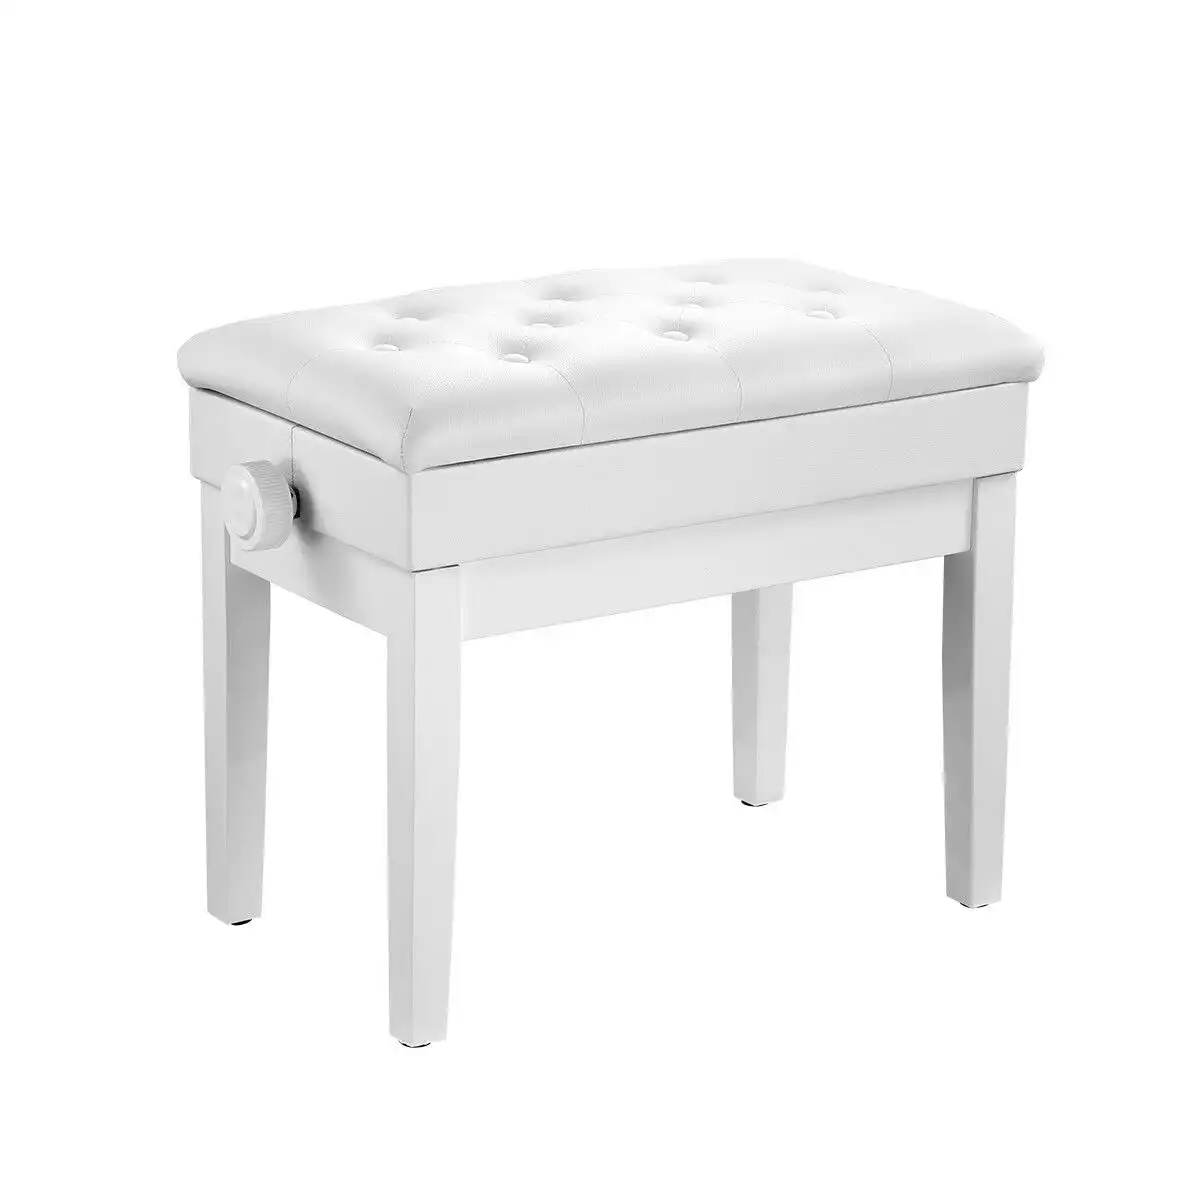 Melodic  Height Adjustable Piano Keyboard Stool Chair Bench Seat with Padded Cushion and Storage Compartment White